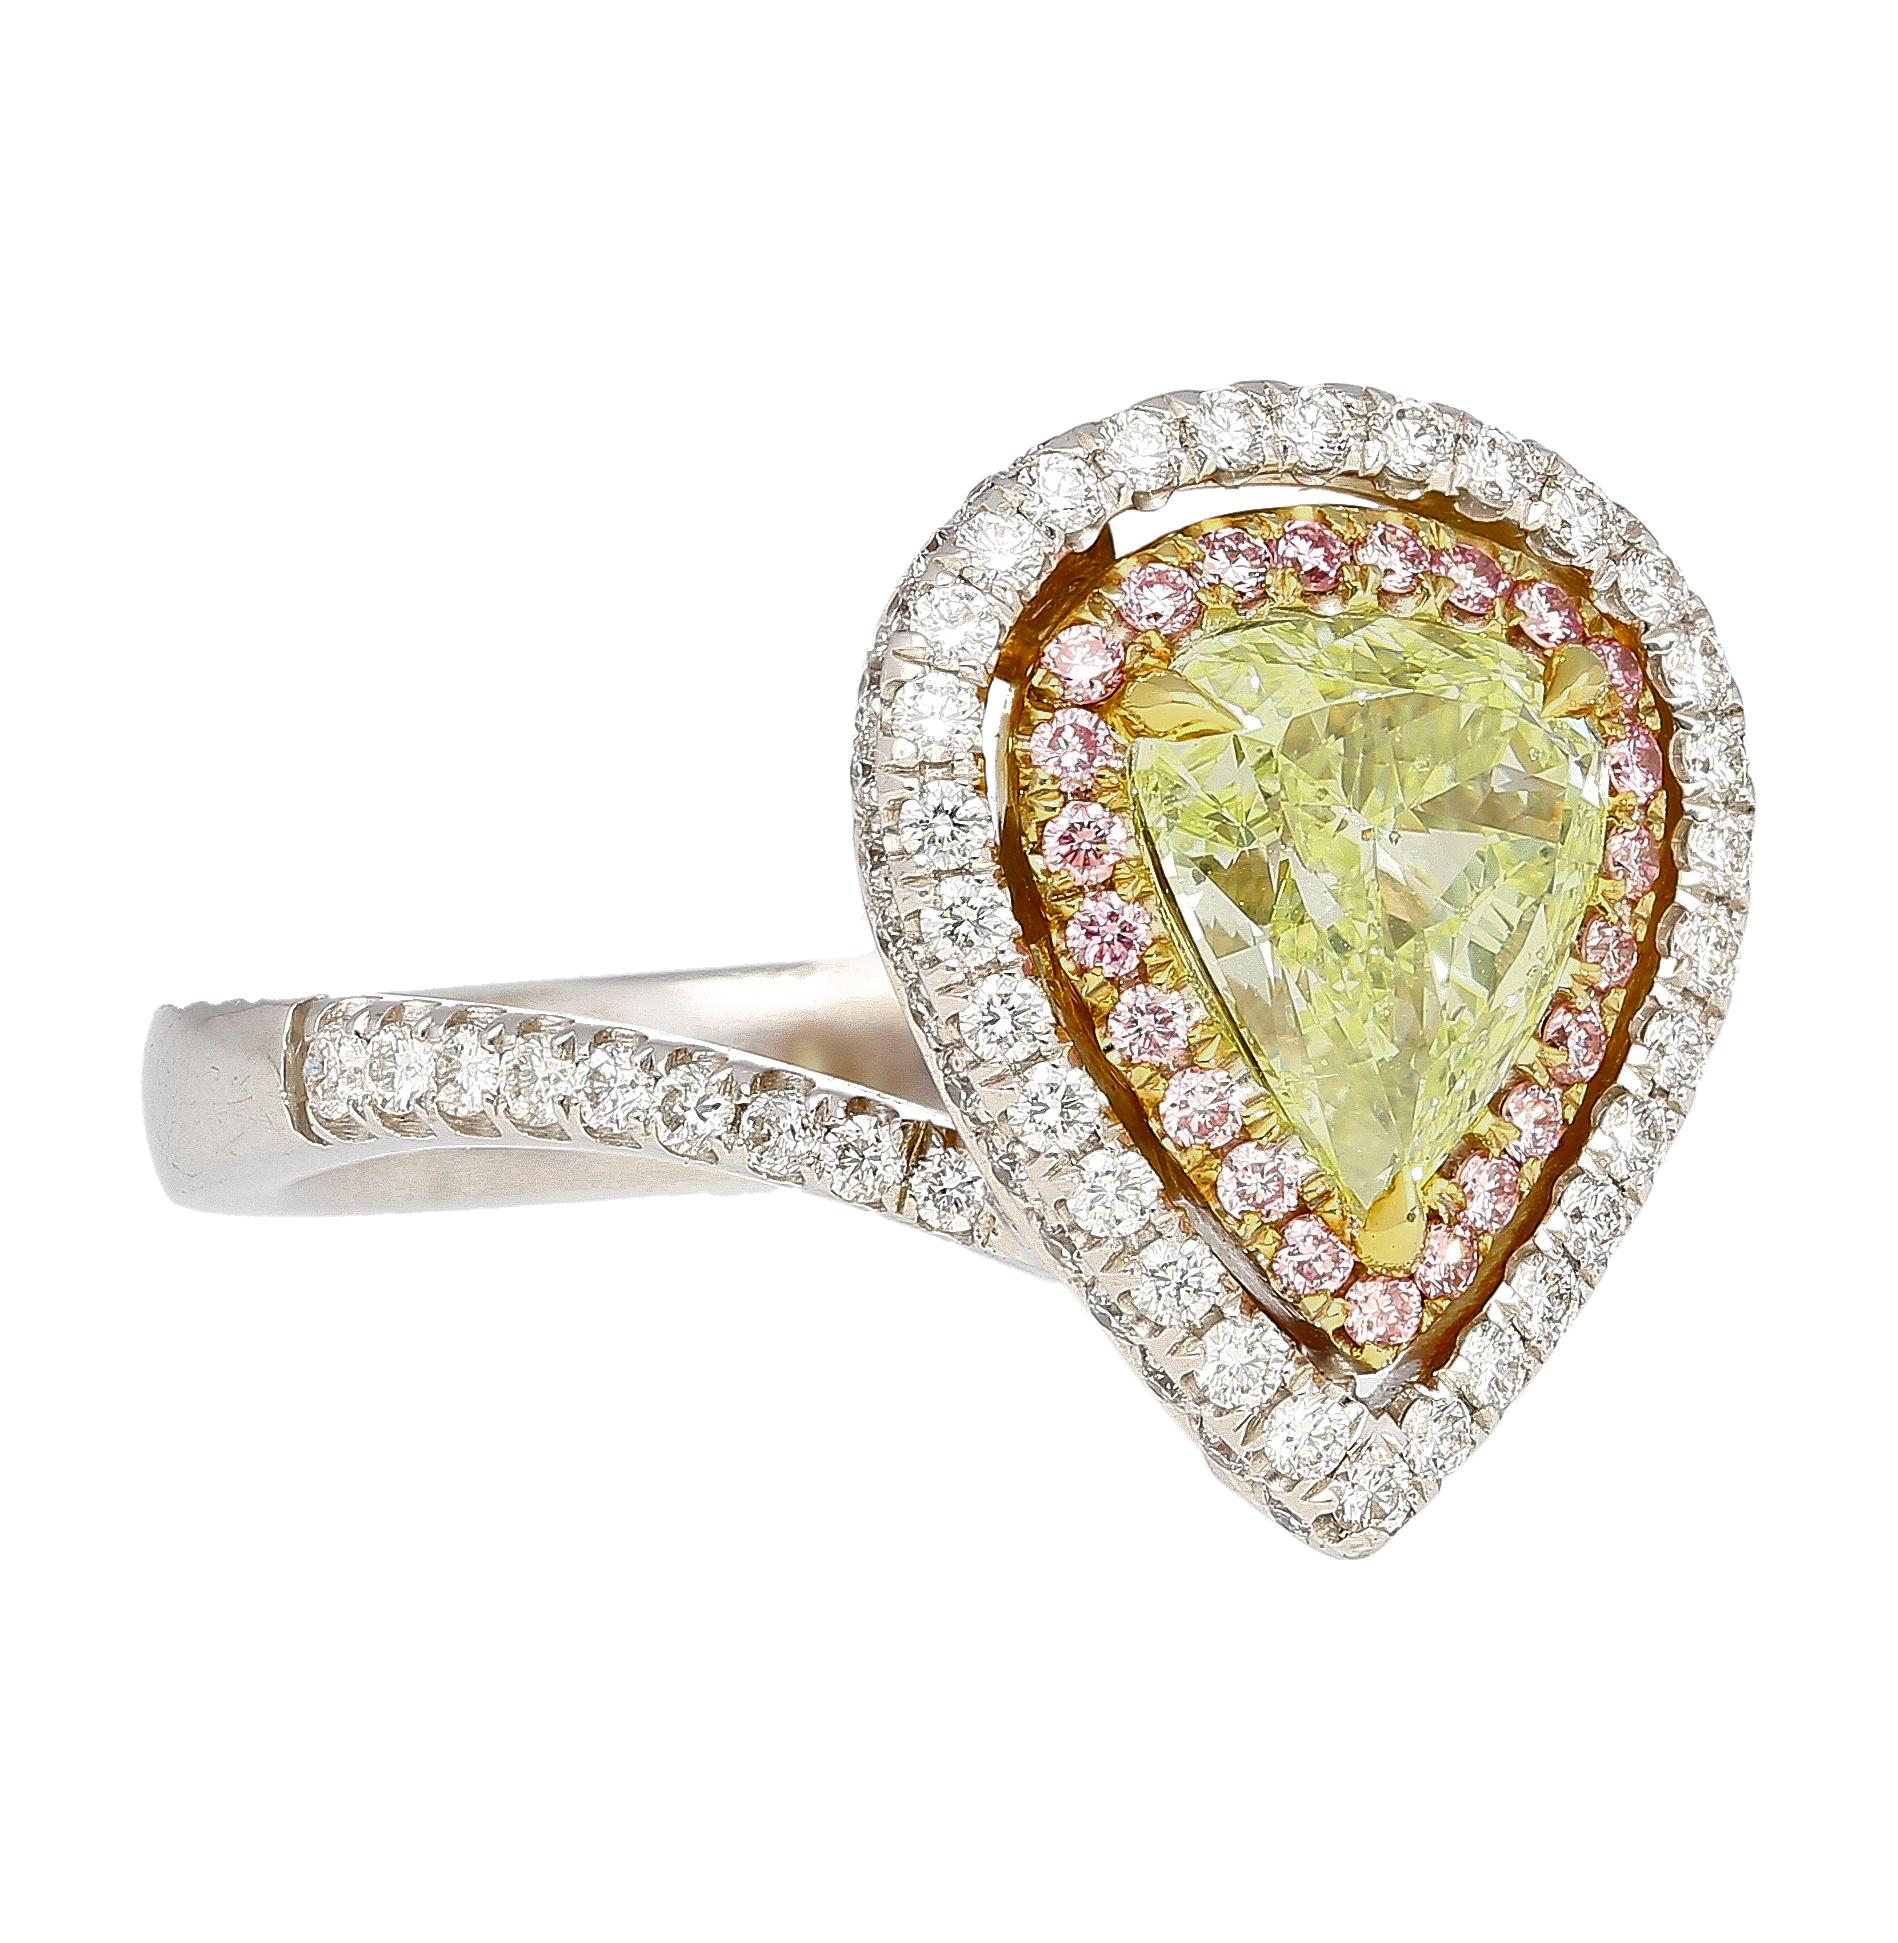 GIA Certified 1.25 Carat Pear Cut Fancy Green-Yellow Diamond Ring in 18K Rose, White, and Yellow Gold. Featuring a double diamond halo and a stunning bypass design. The center stone is a GIA certified natural fancy green-yellow diamond with even